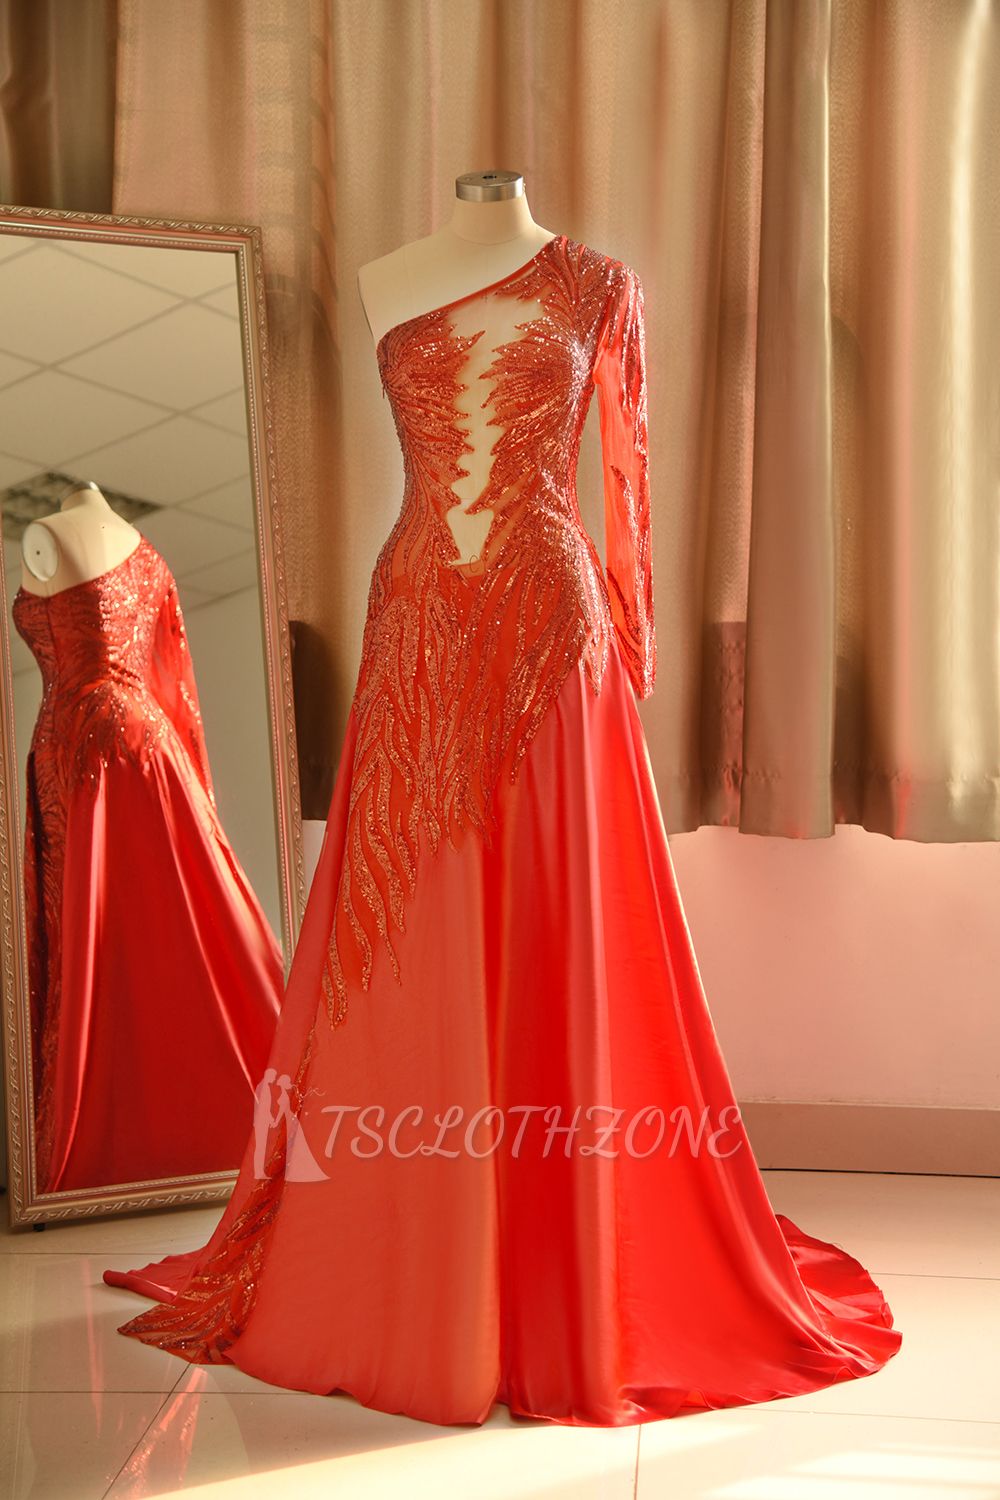 Sexy See-through One shoulder Red A-line Prom Dress TsClothzone Design